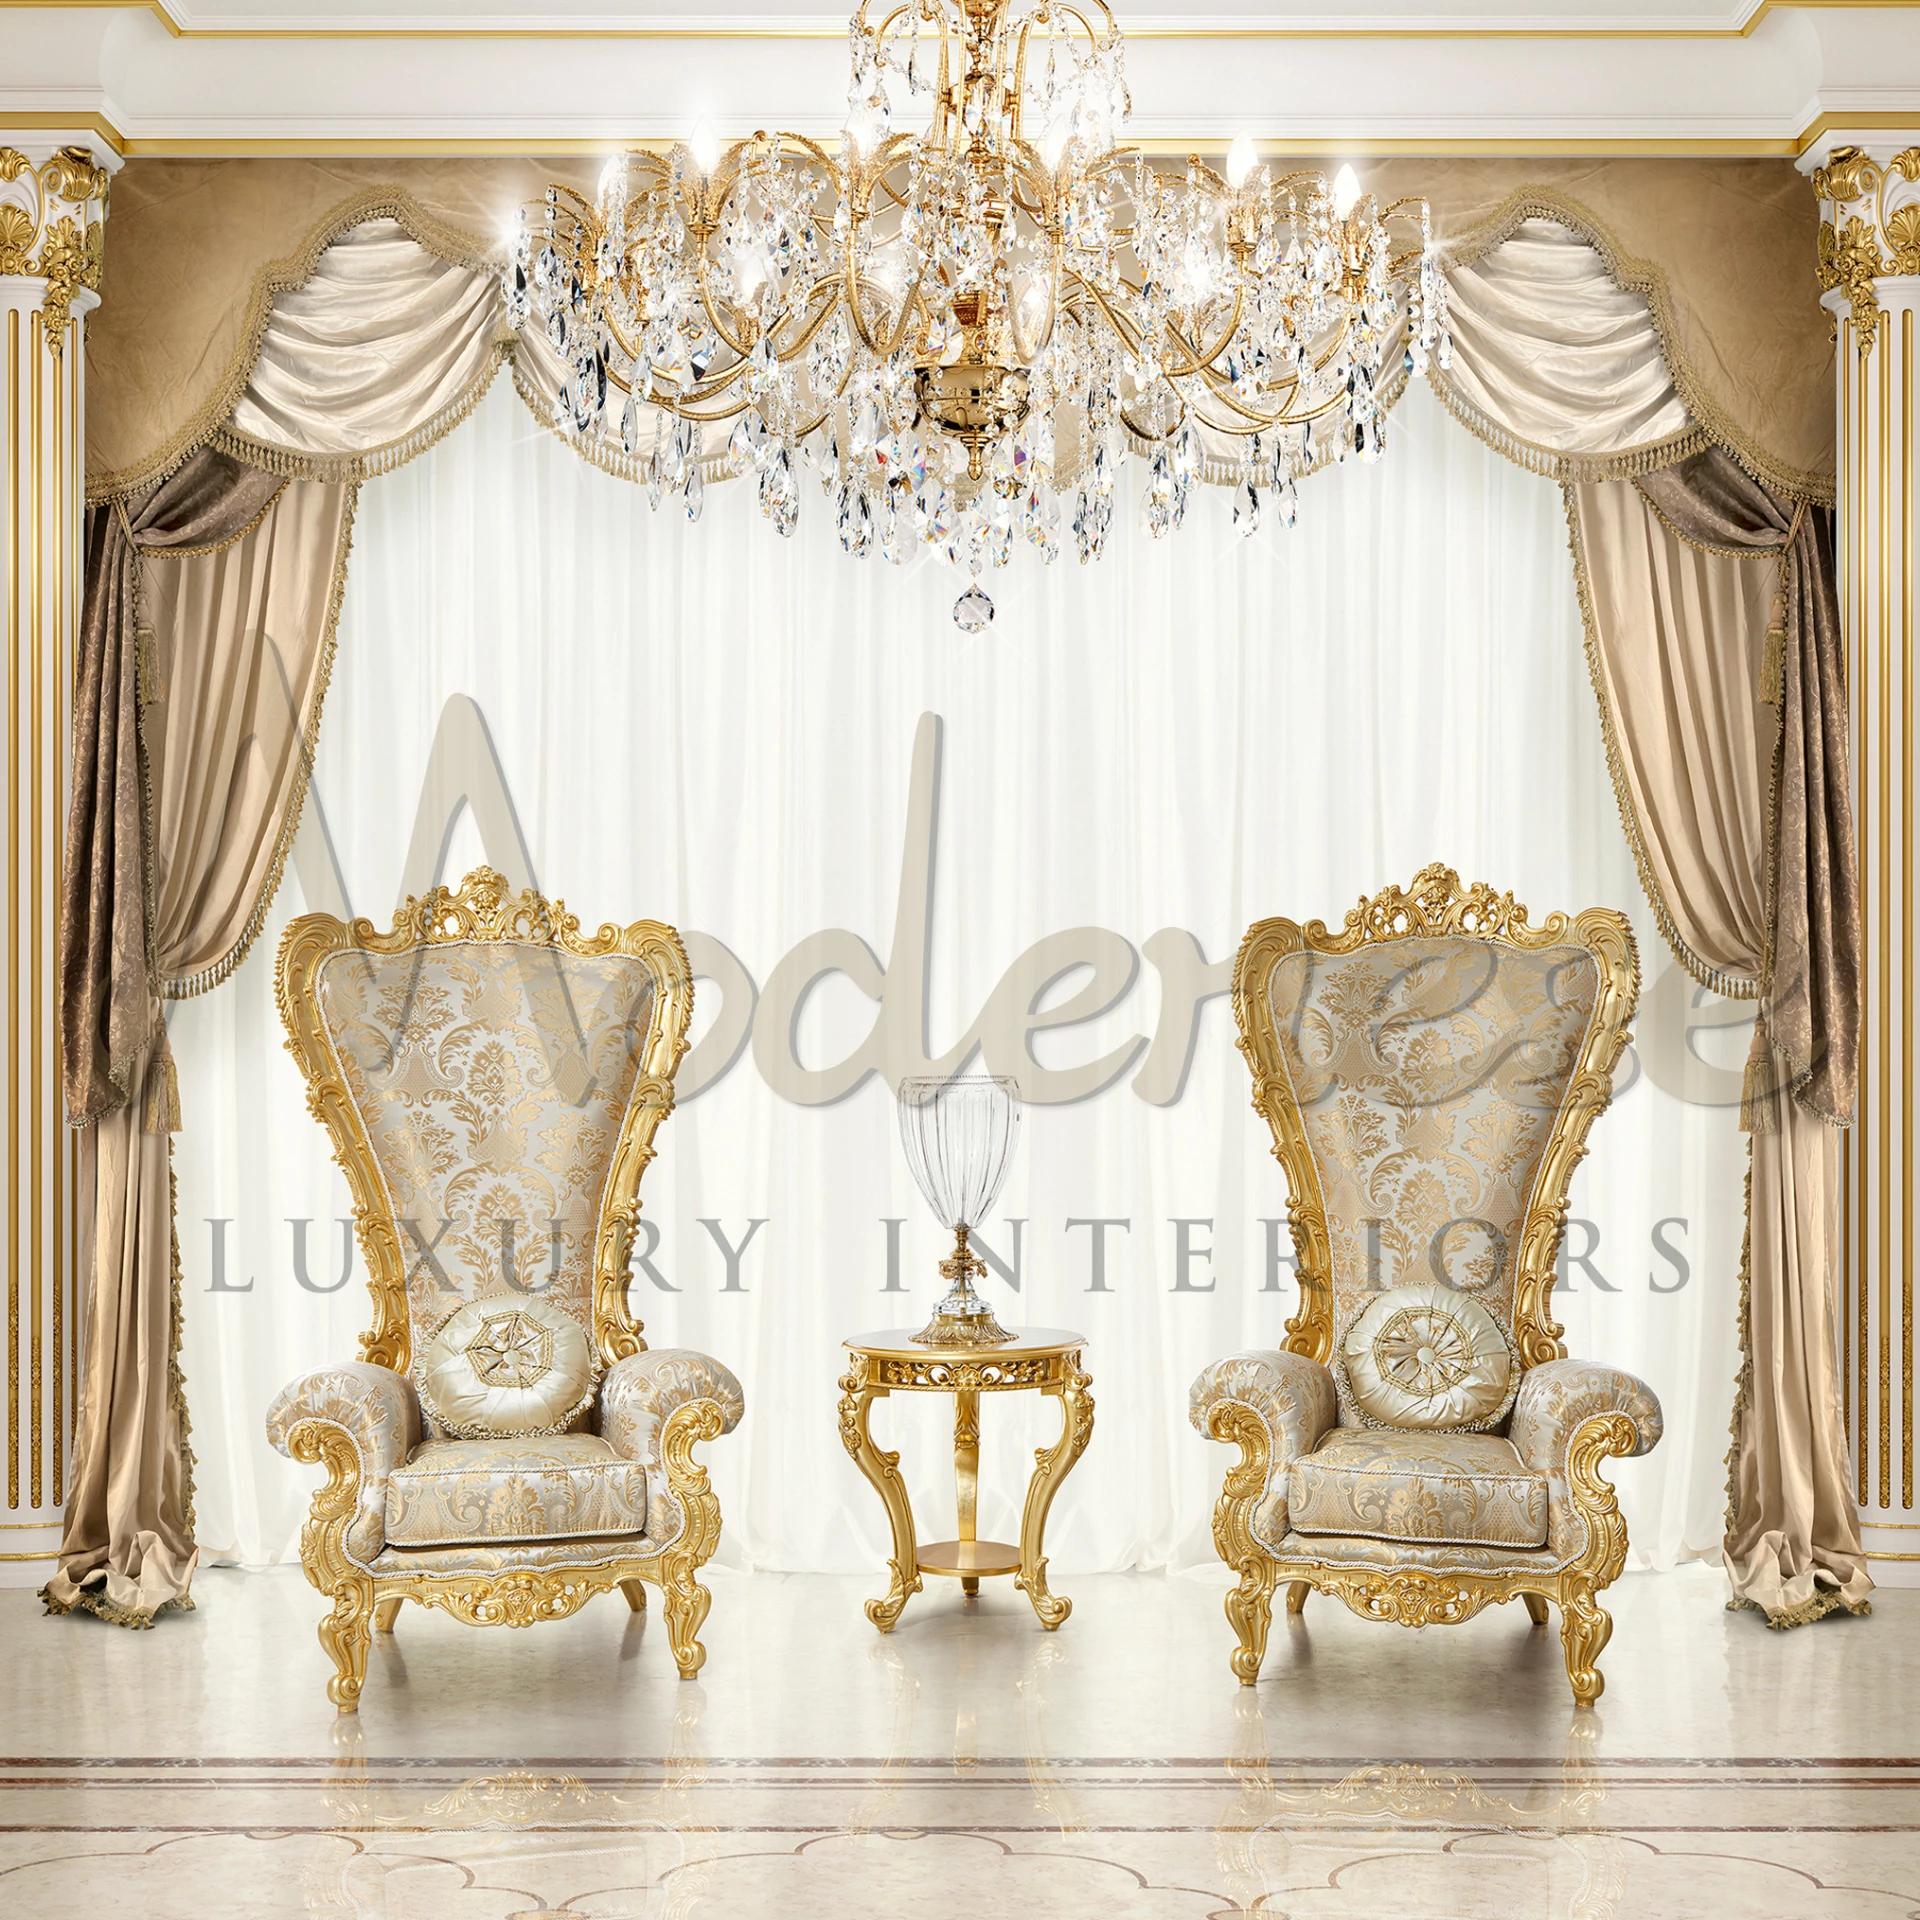 Luxurious seating area with fancy golden chairs and a crystal Empire Chandelier Elegant Lighting.